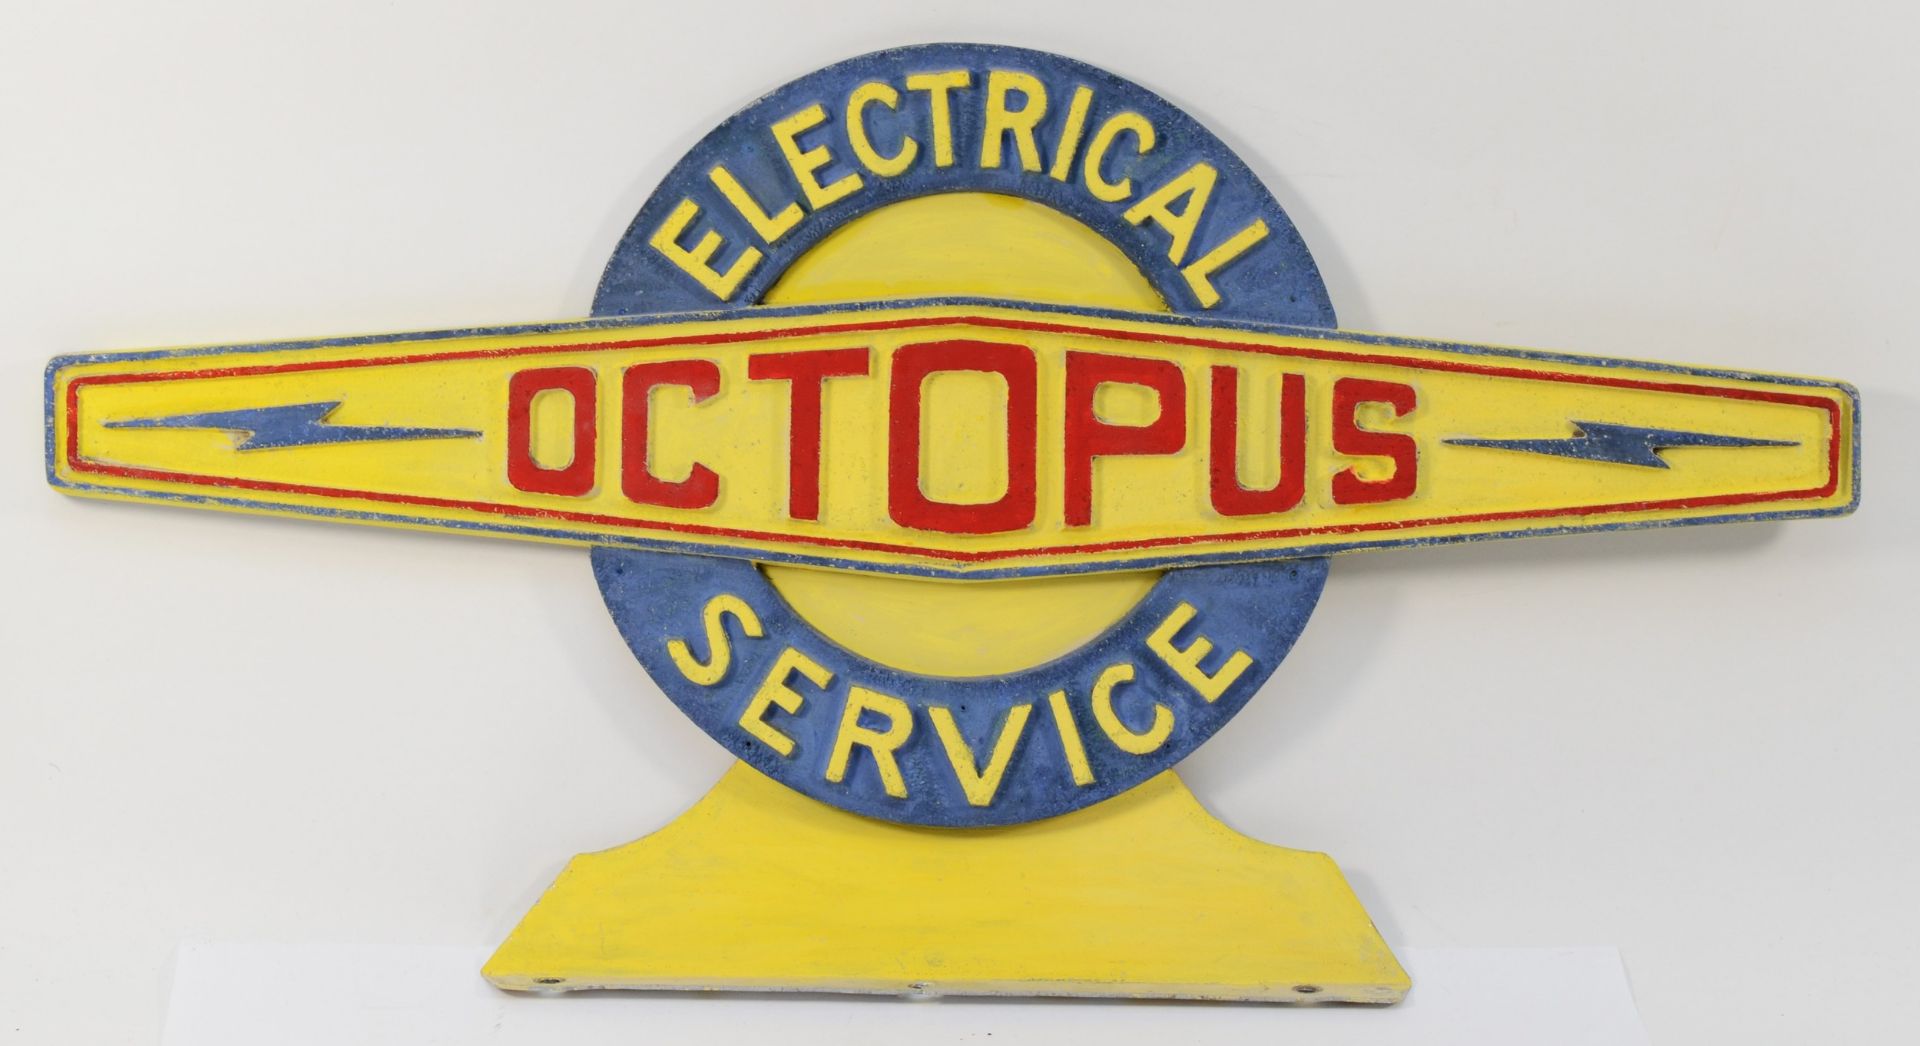 Octopus Electrical Service, a cold painted alloy advertising sign, 53 x 28cm